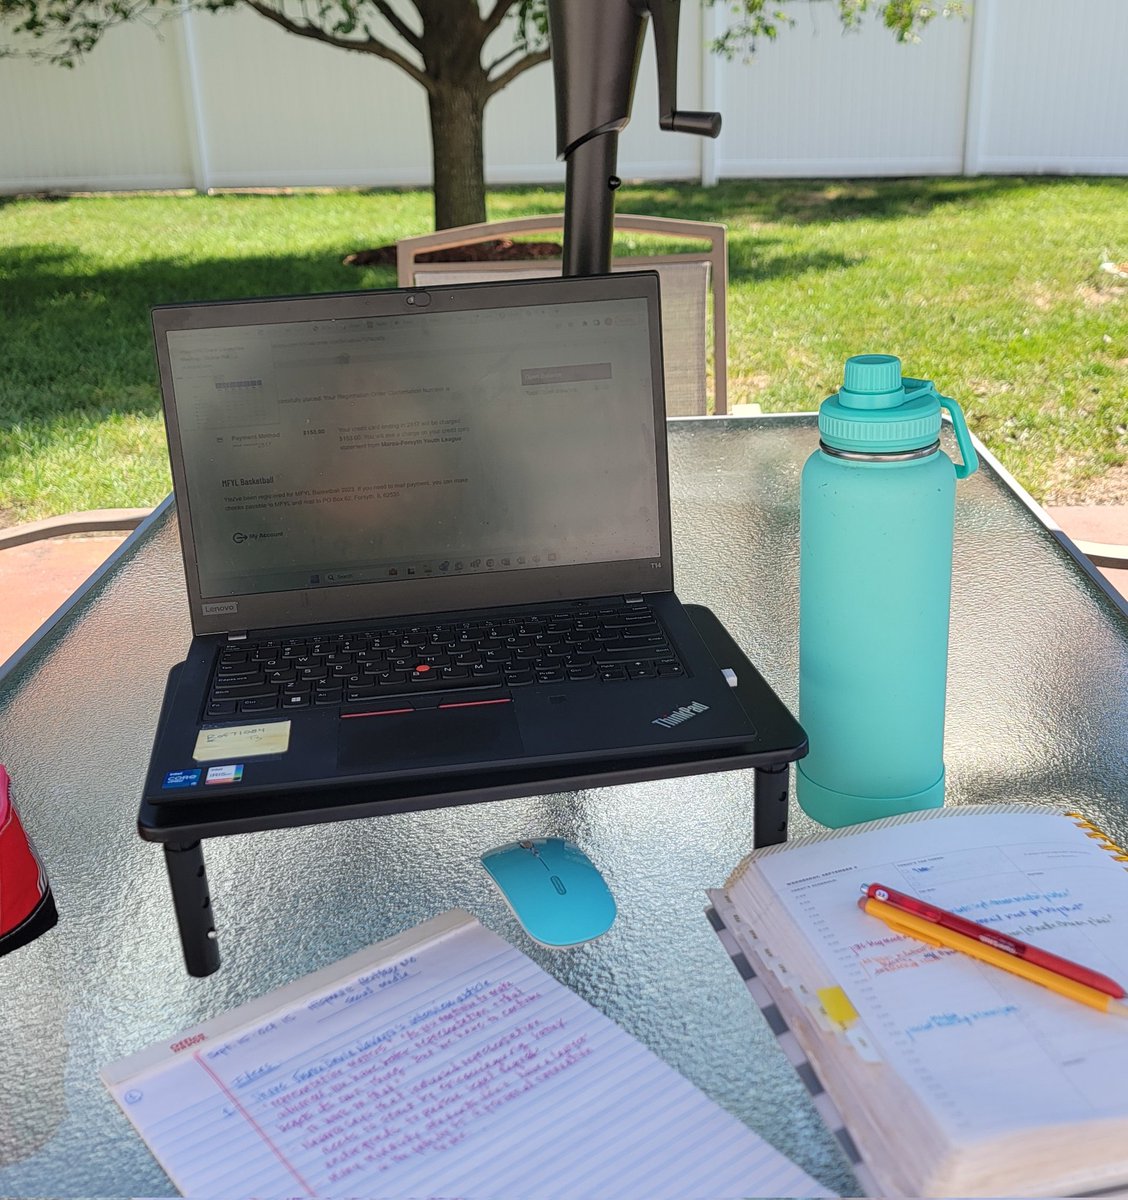 When working remotely, it's been important for me to set up in a space that provides me with everything I need to work efficiently + productively. I love sunlight & organization! What are some of your 'must haves' as you've set up your home work space? #workremote #wellbeing